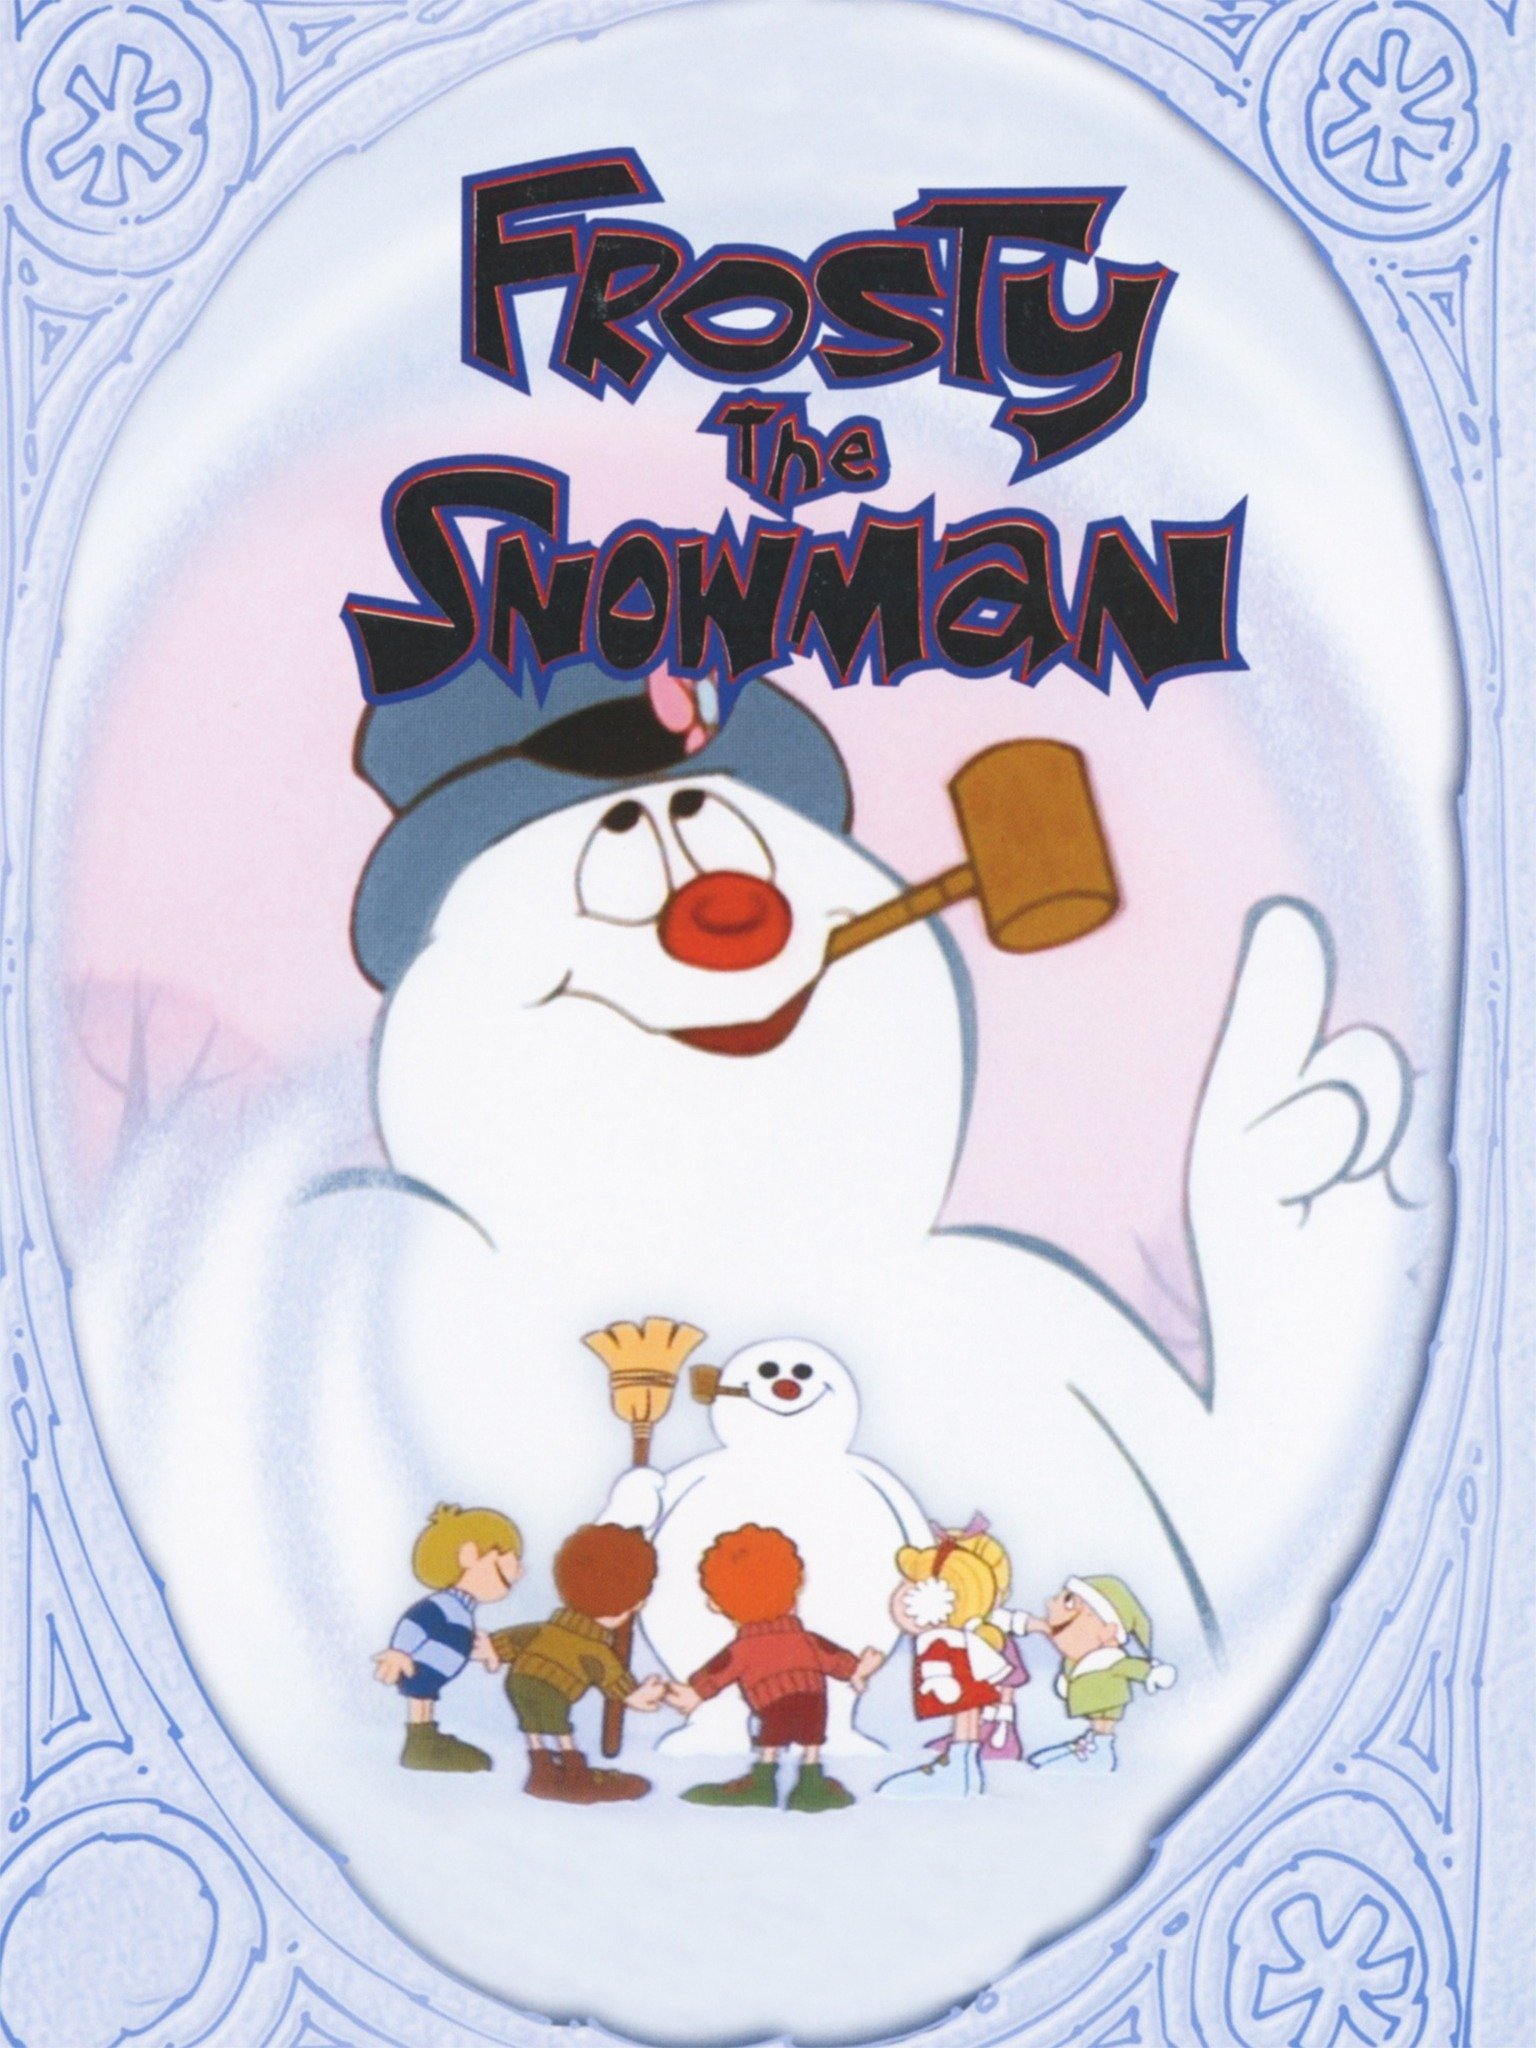 Who Played Frosty The Snowman